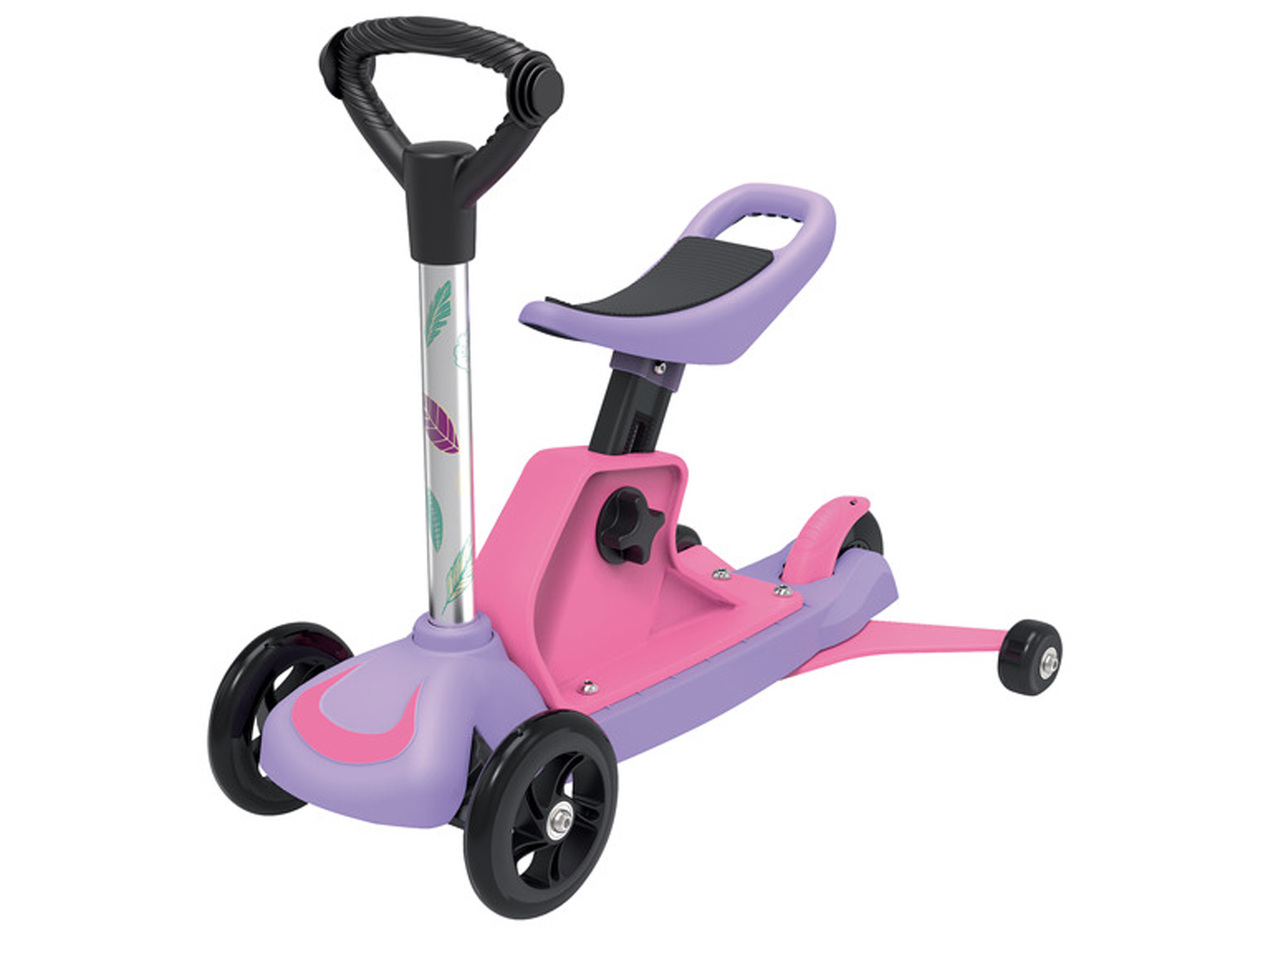 PLAYTIVE JUNIOR 3-in-1 Tri-Scooter